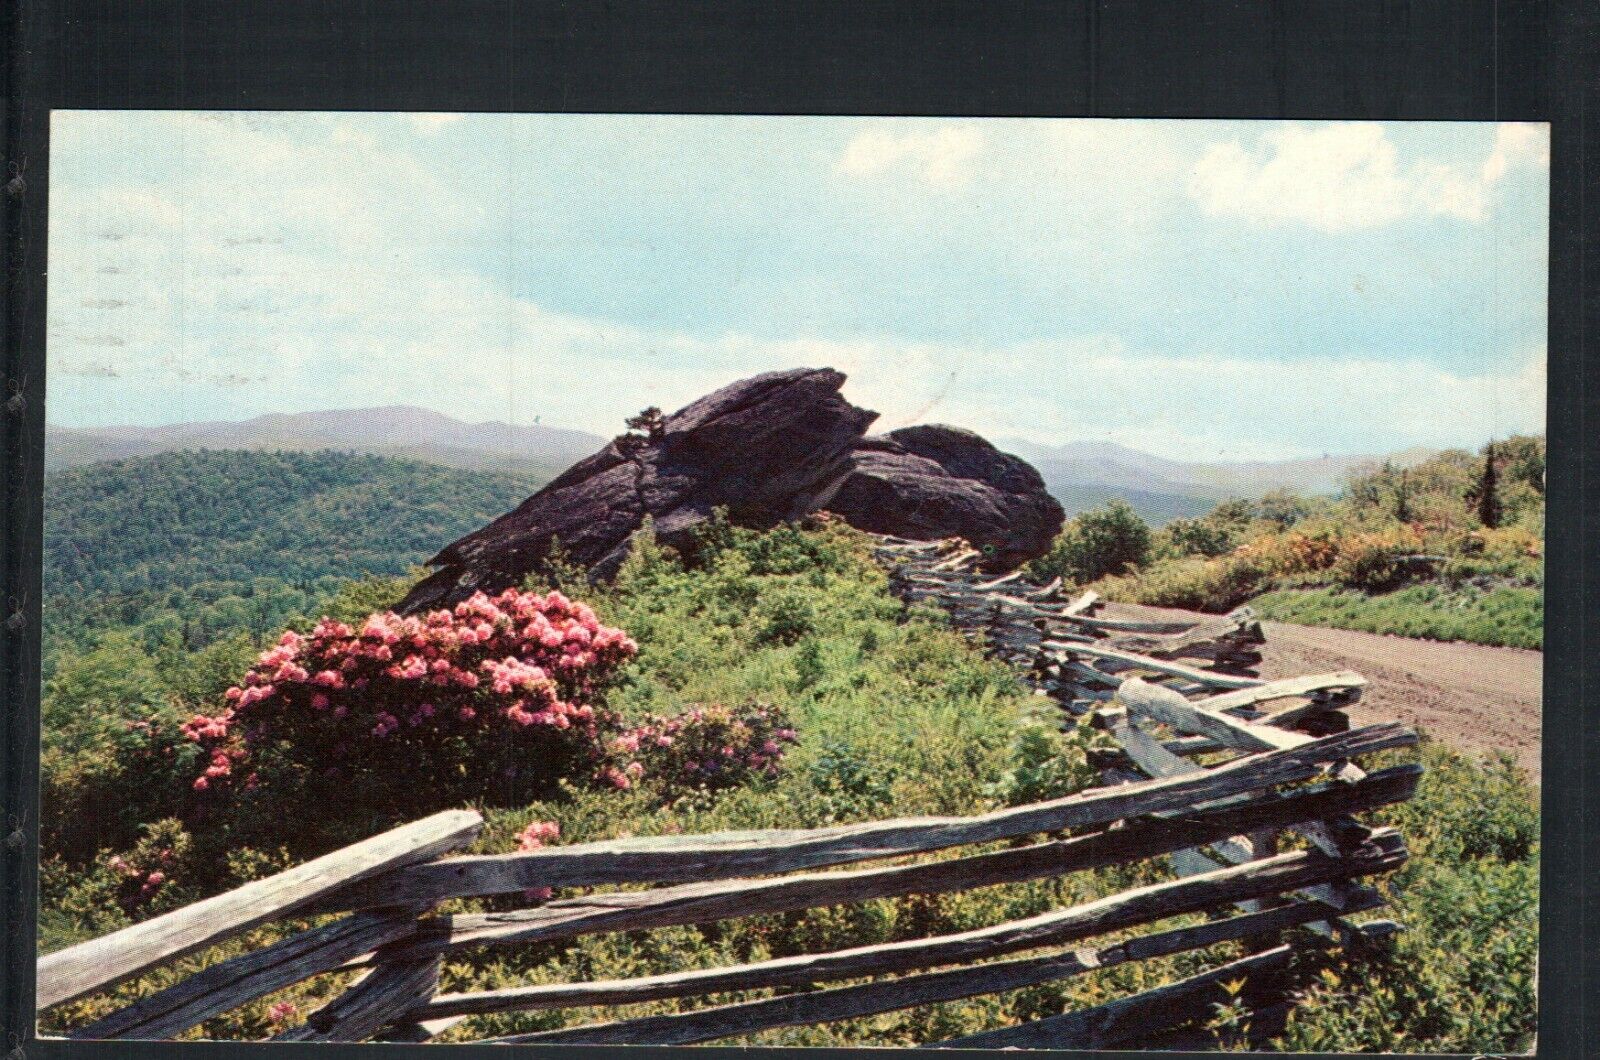 1957 LINVILLE, NC *  GRANDFATHER MOUNTAIN ROAD * POSTED BLOWING ROCK, NC  CHROME